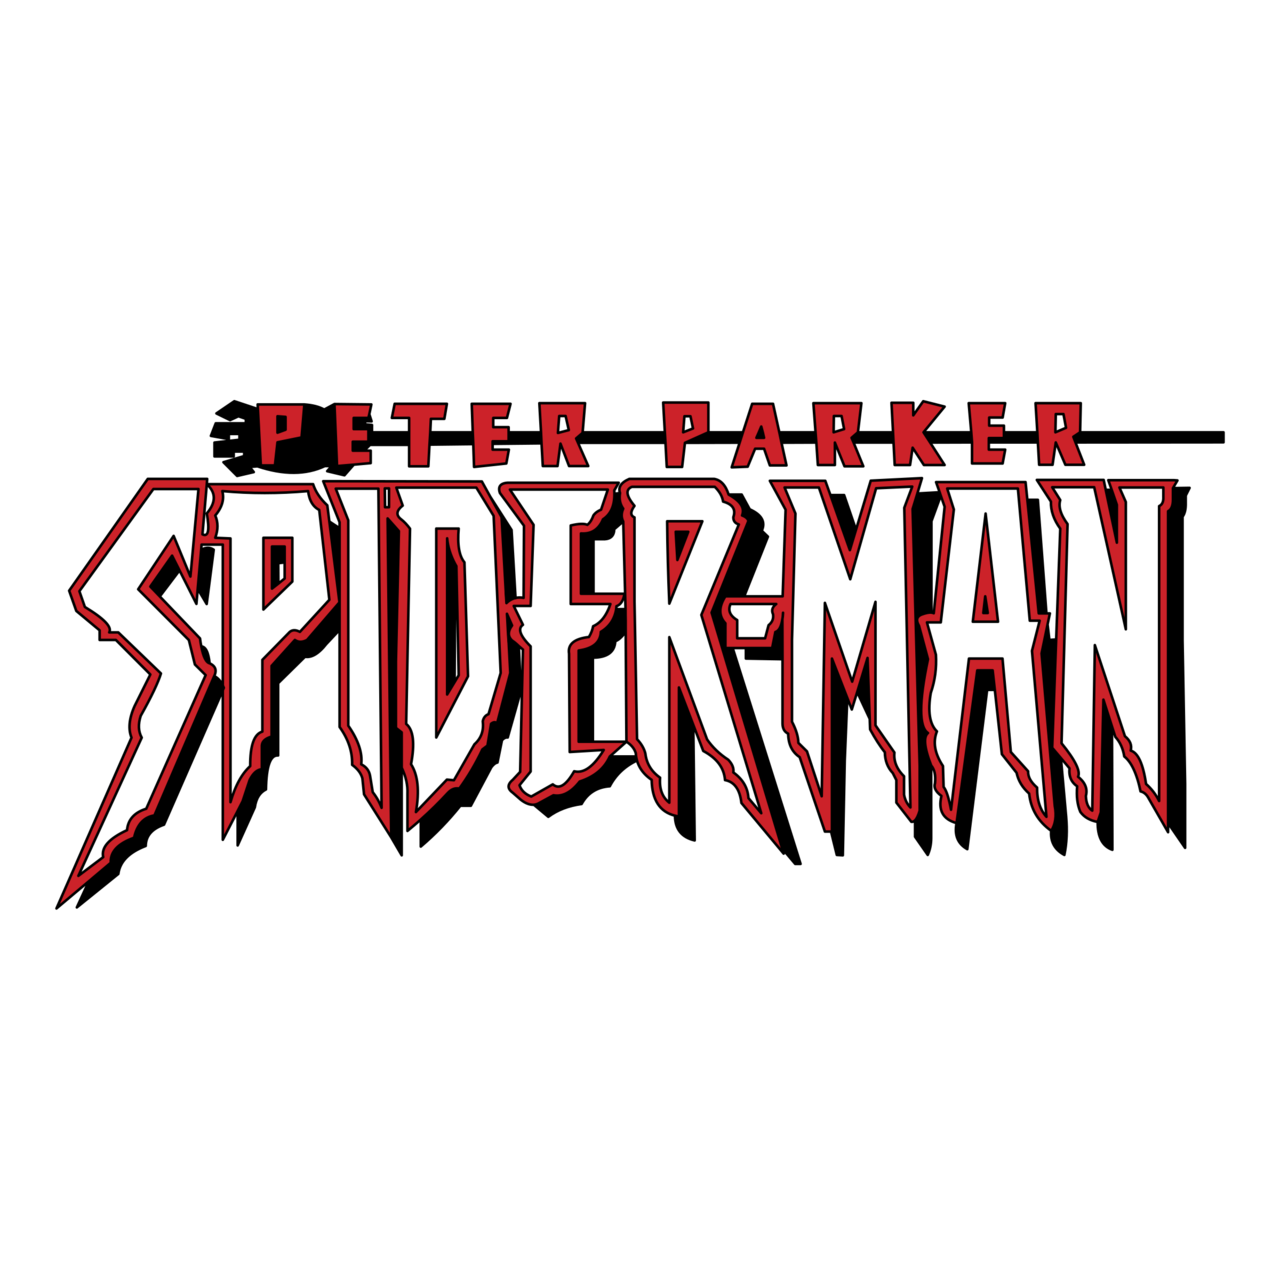 Download Peter Parker Spider man Logo PNG and Vector (PDF, SVG, Ai, EPS)  Free